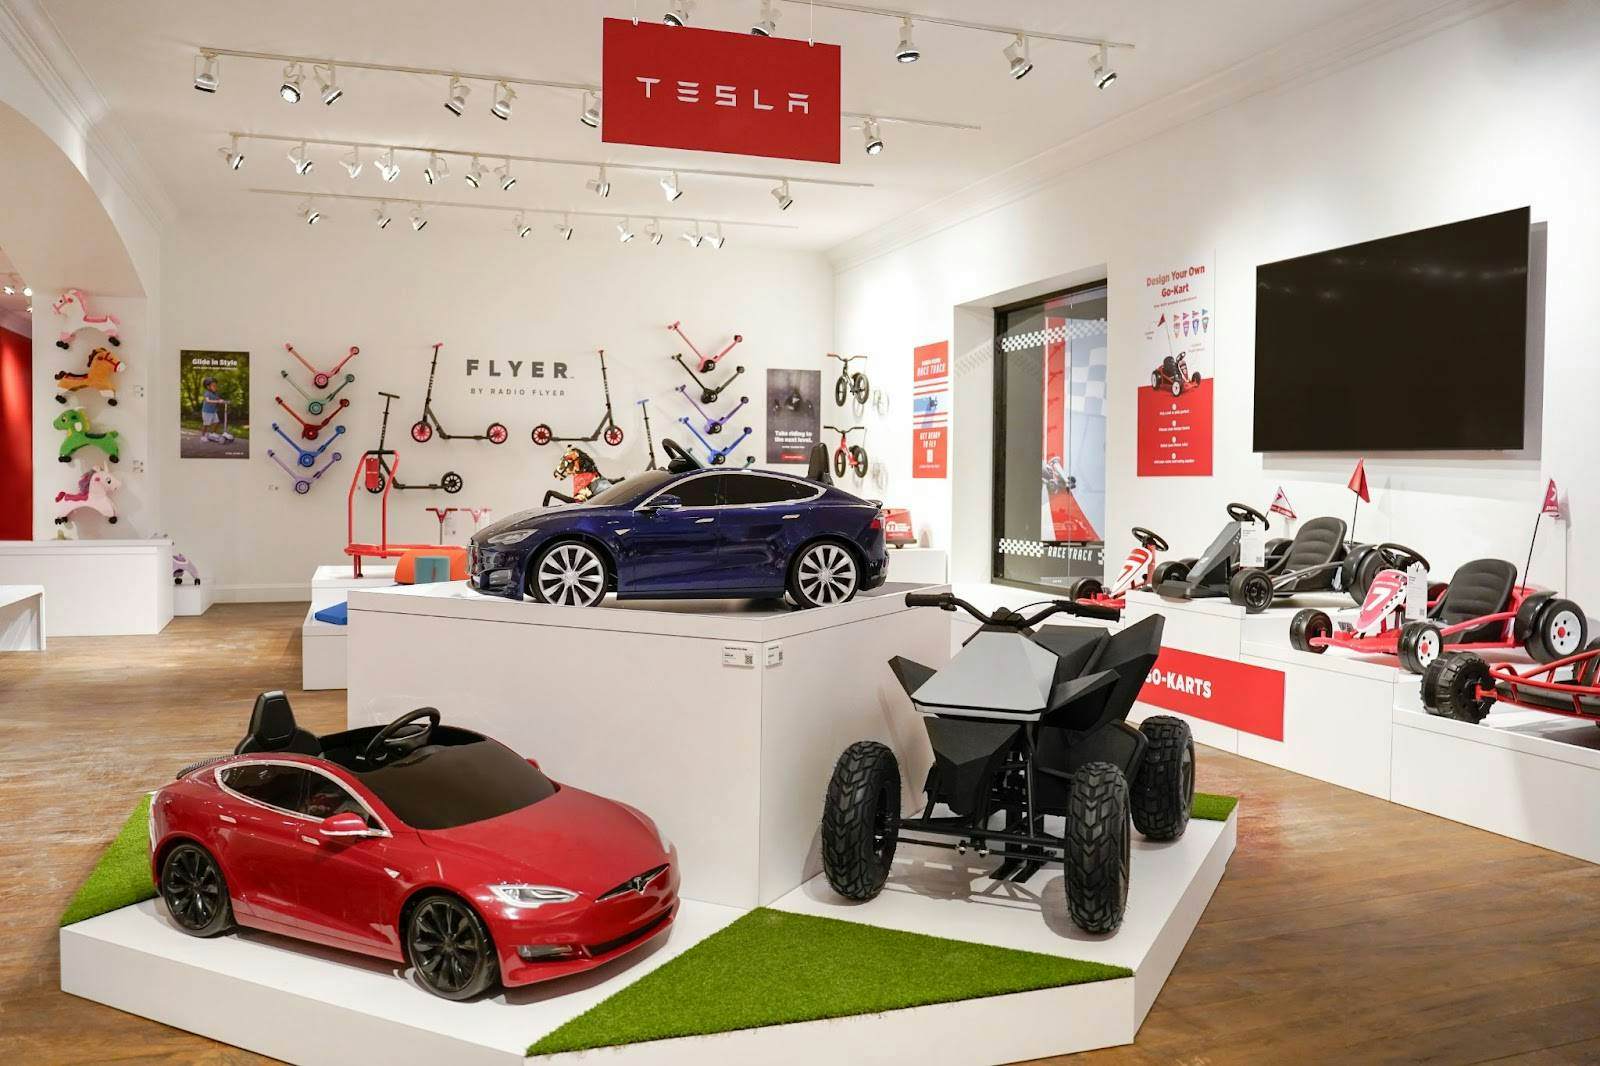 A display inside the Radio Flyer store shows three models of kid-sized Tesla electric vehicles..